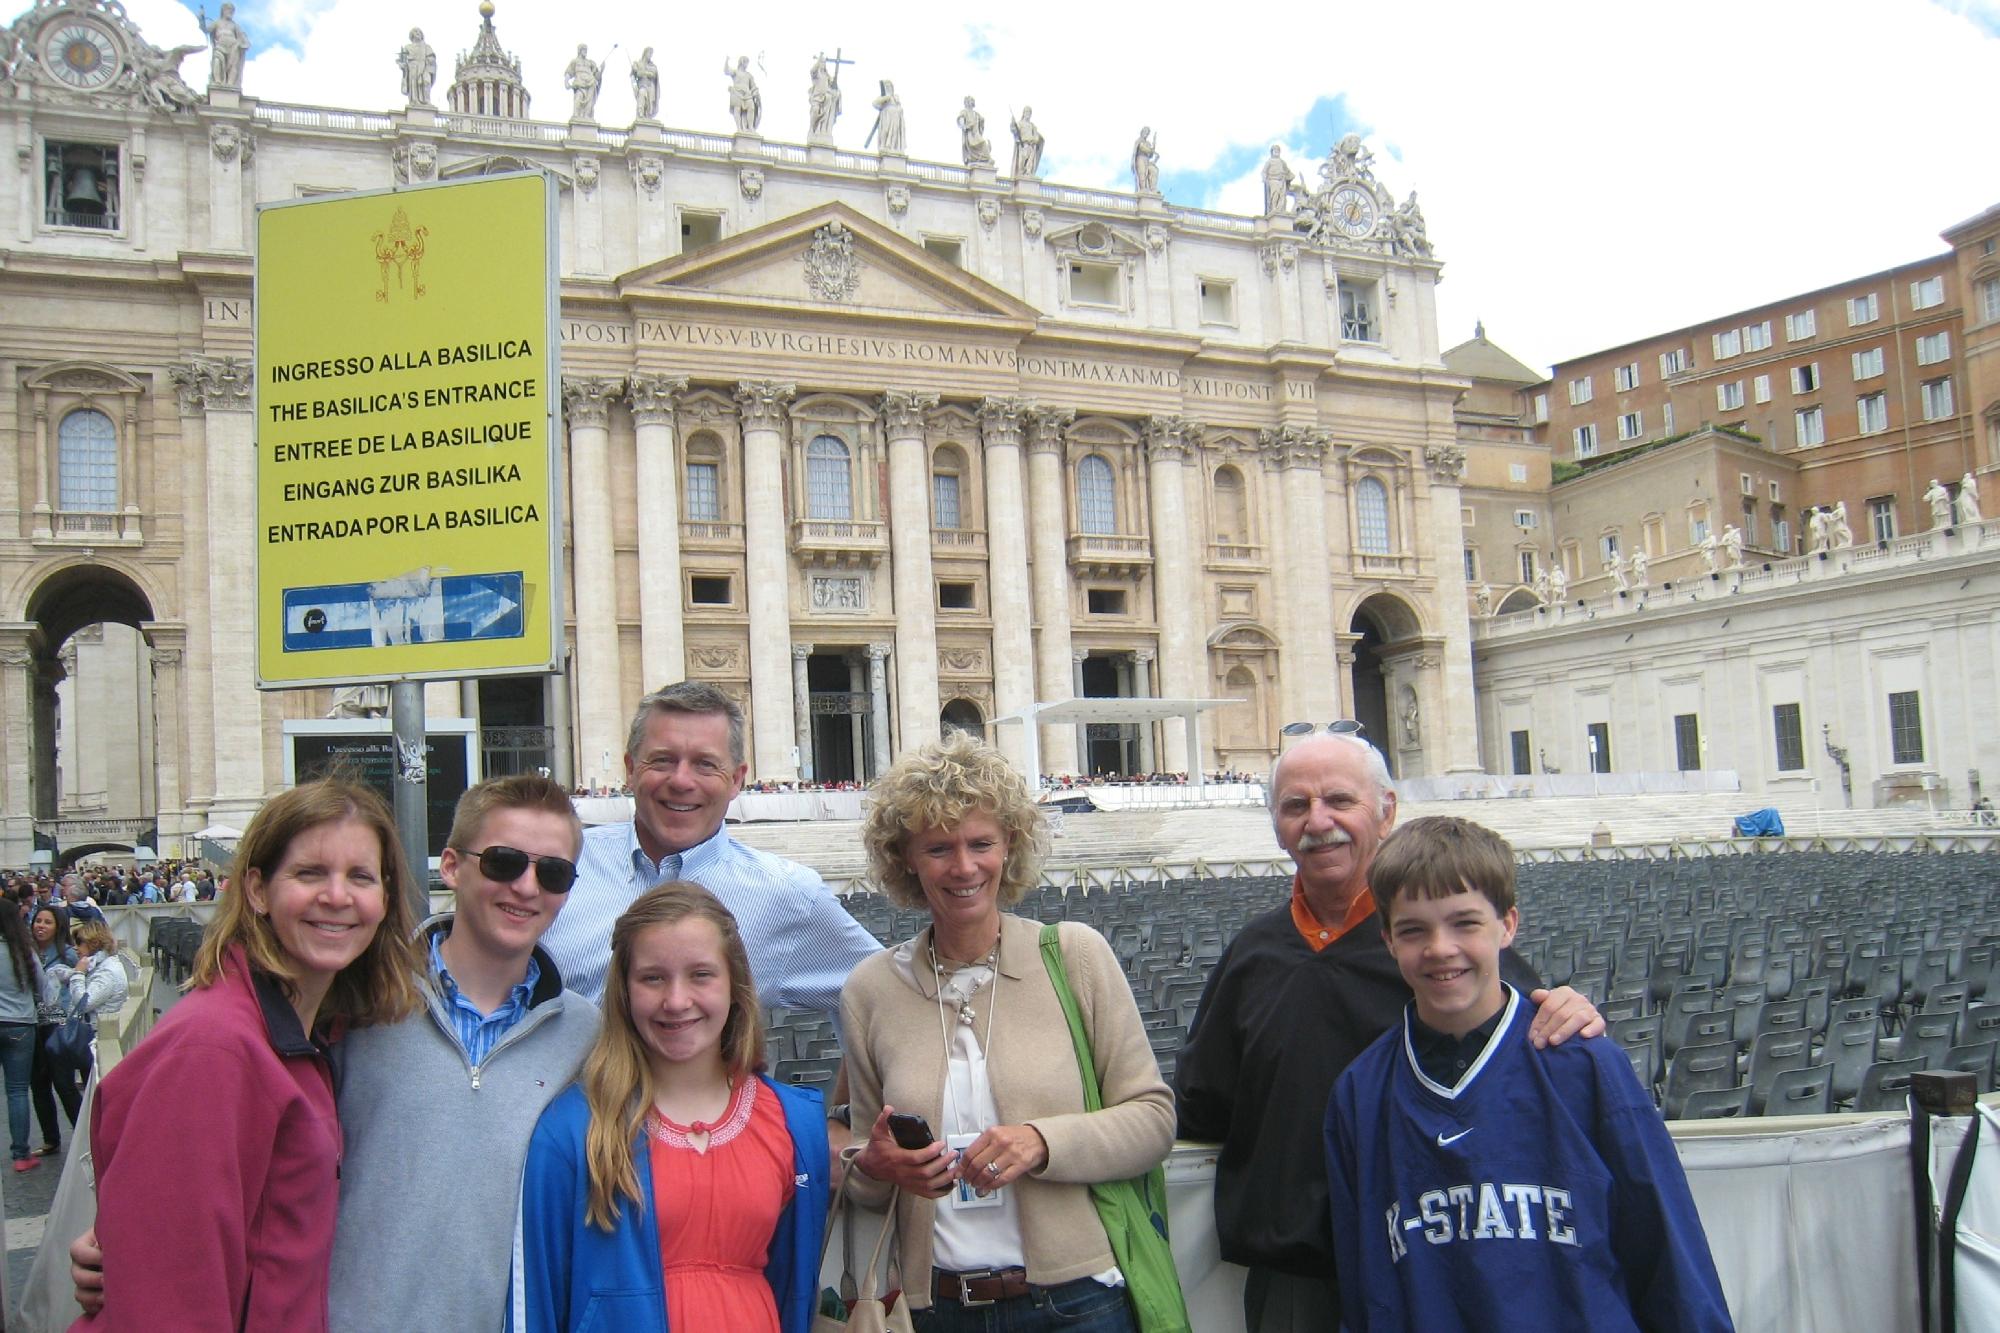 A Guide in Rome - Day Tours